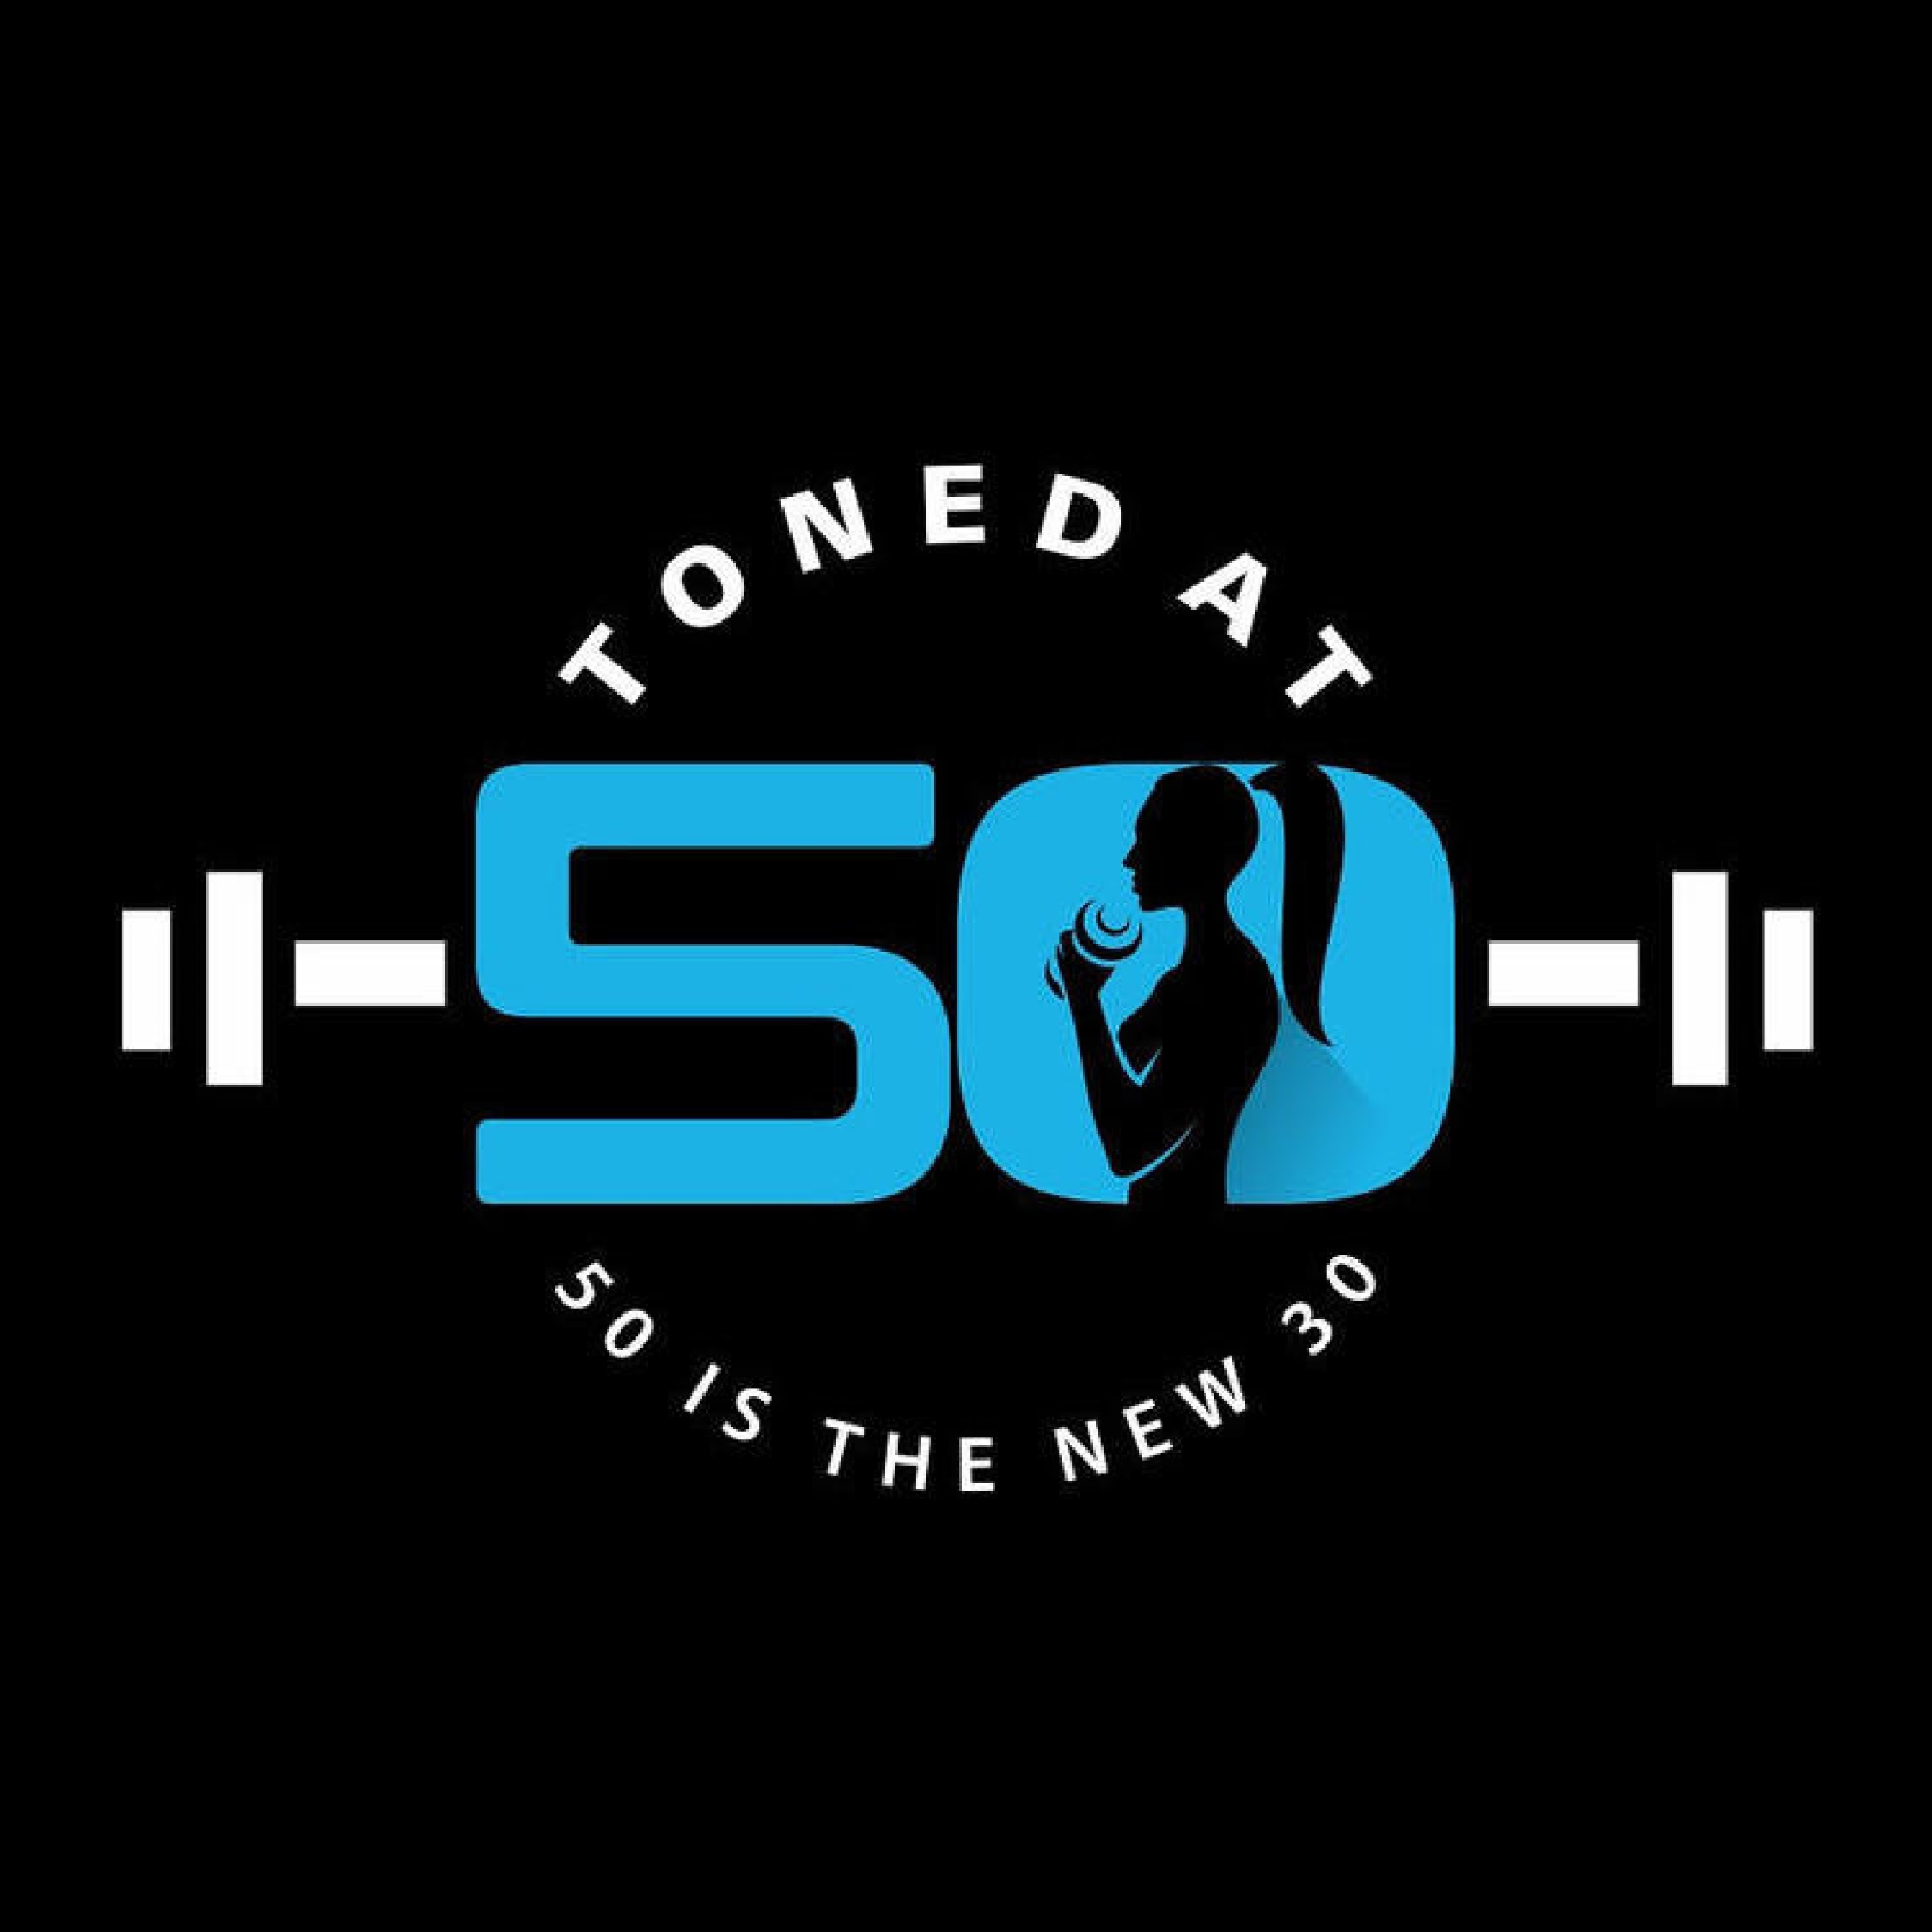 The tonedatfifty's Podcast